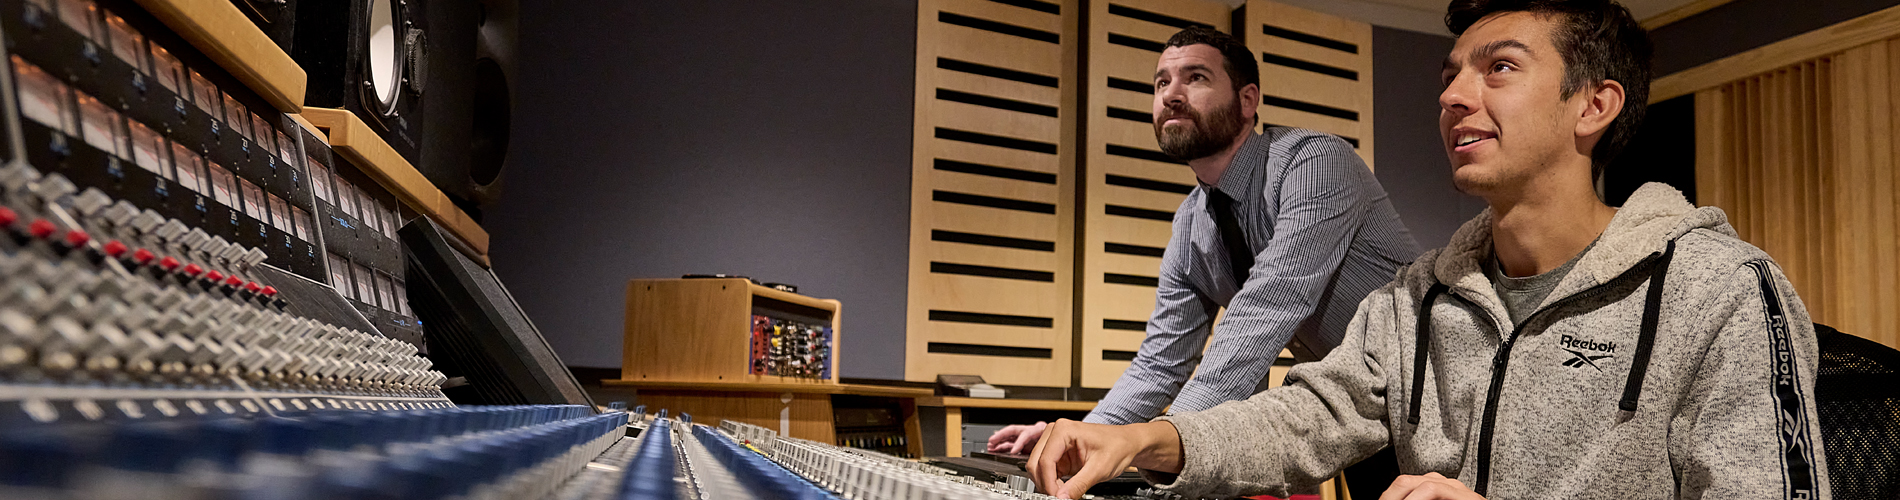 A student works in an audio engineering lab on an audio console with a faculty member